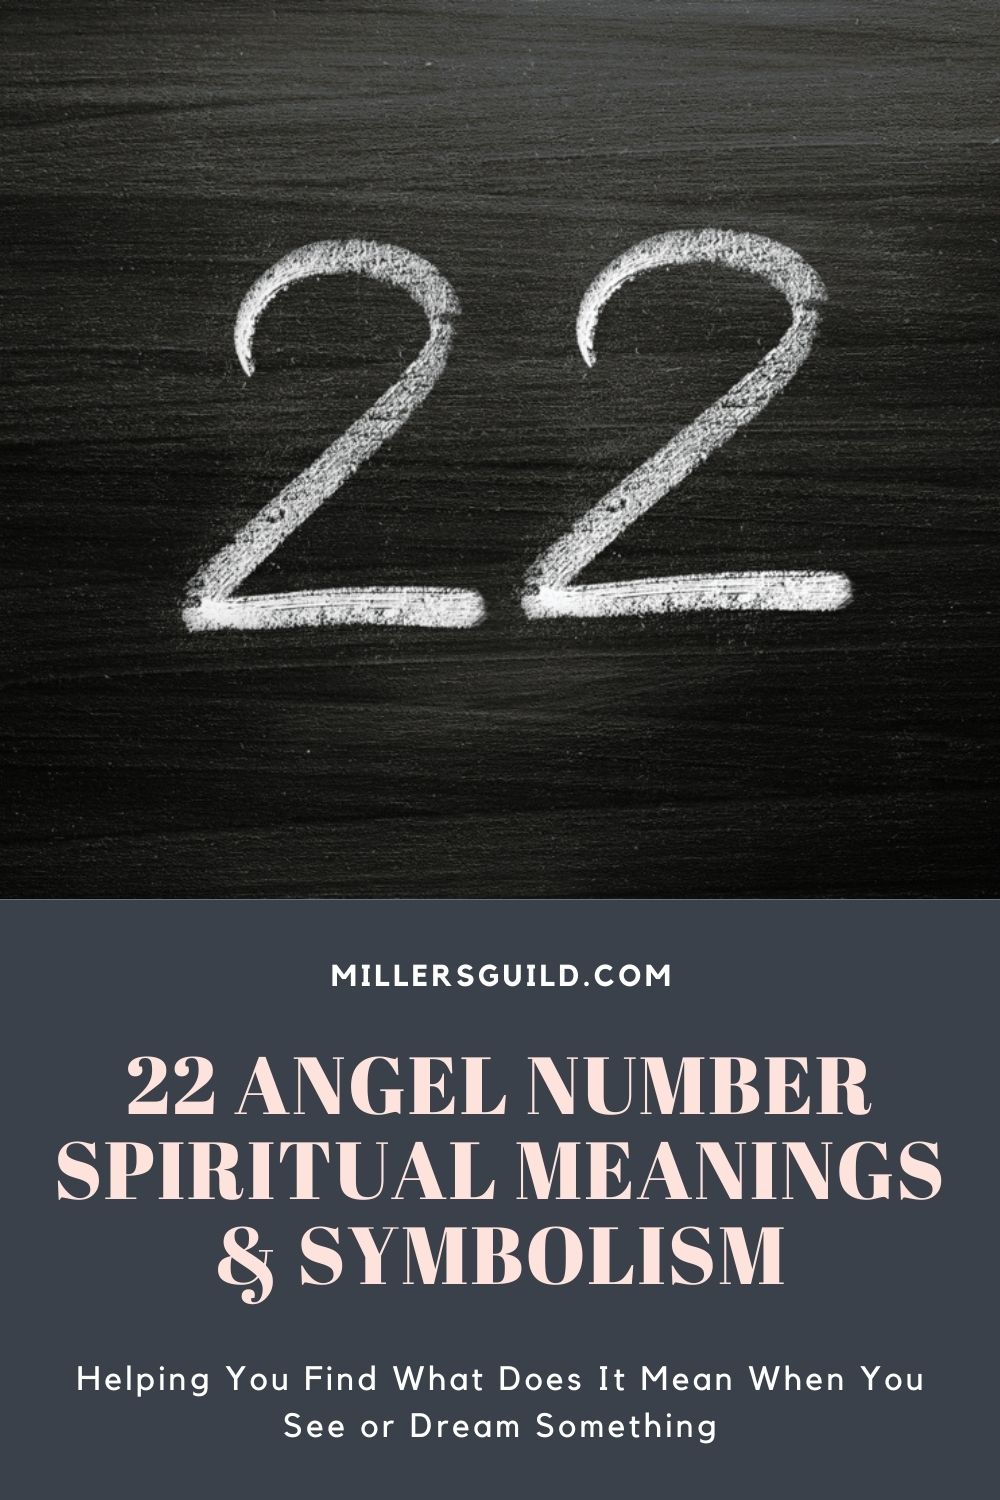 22 Angel Number Spiritual Meanings & Symbolism 2